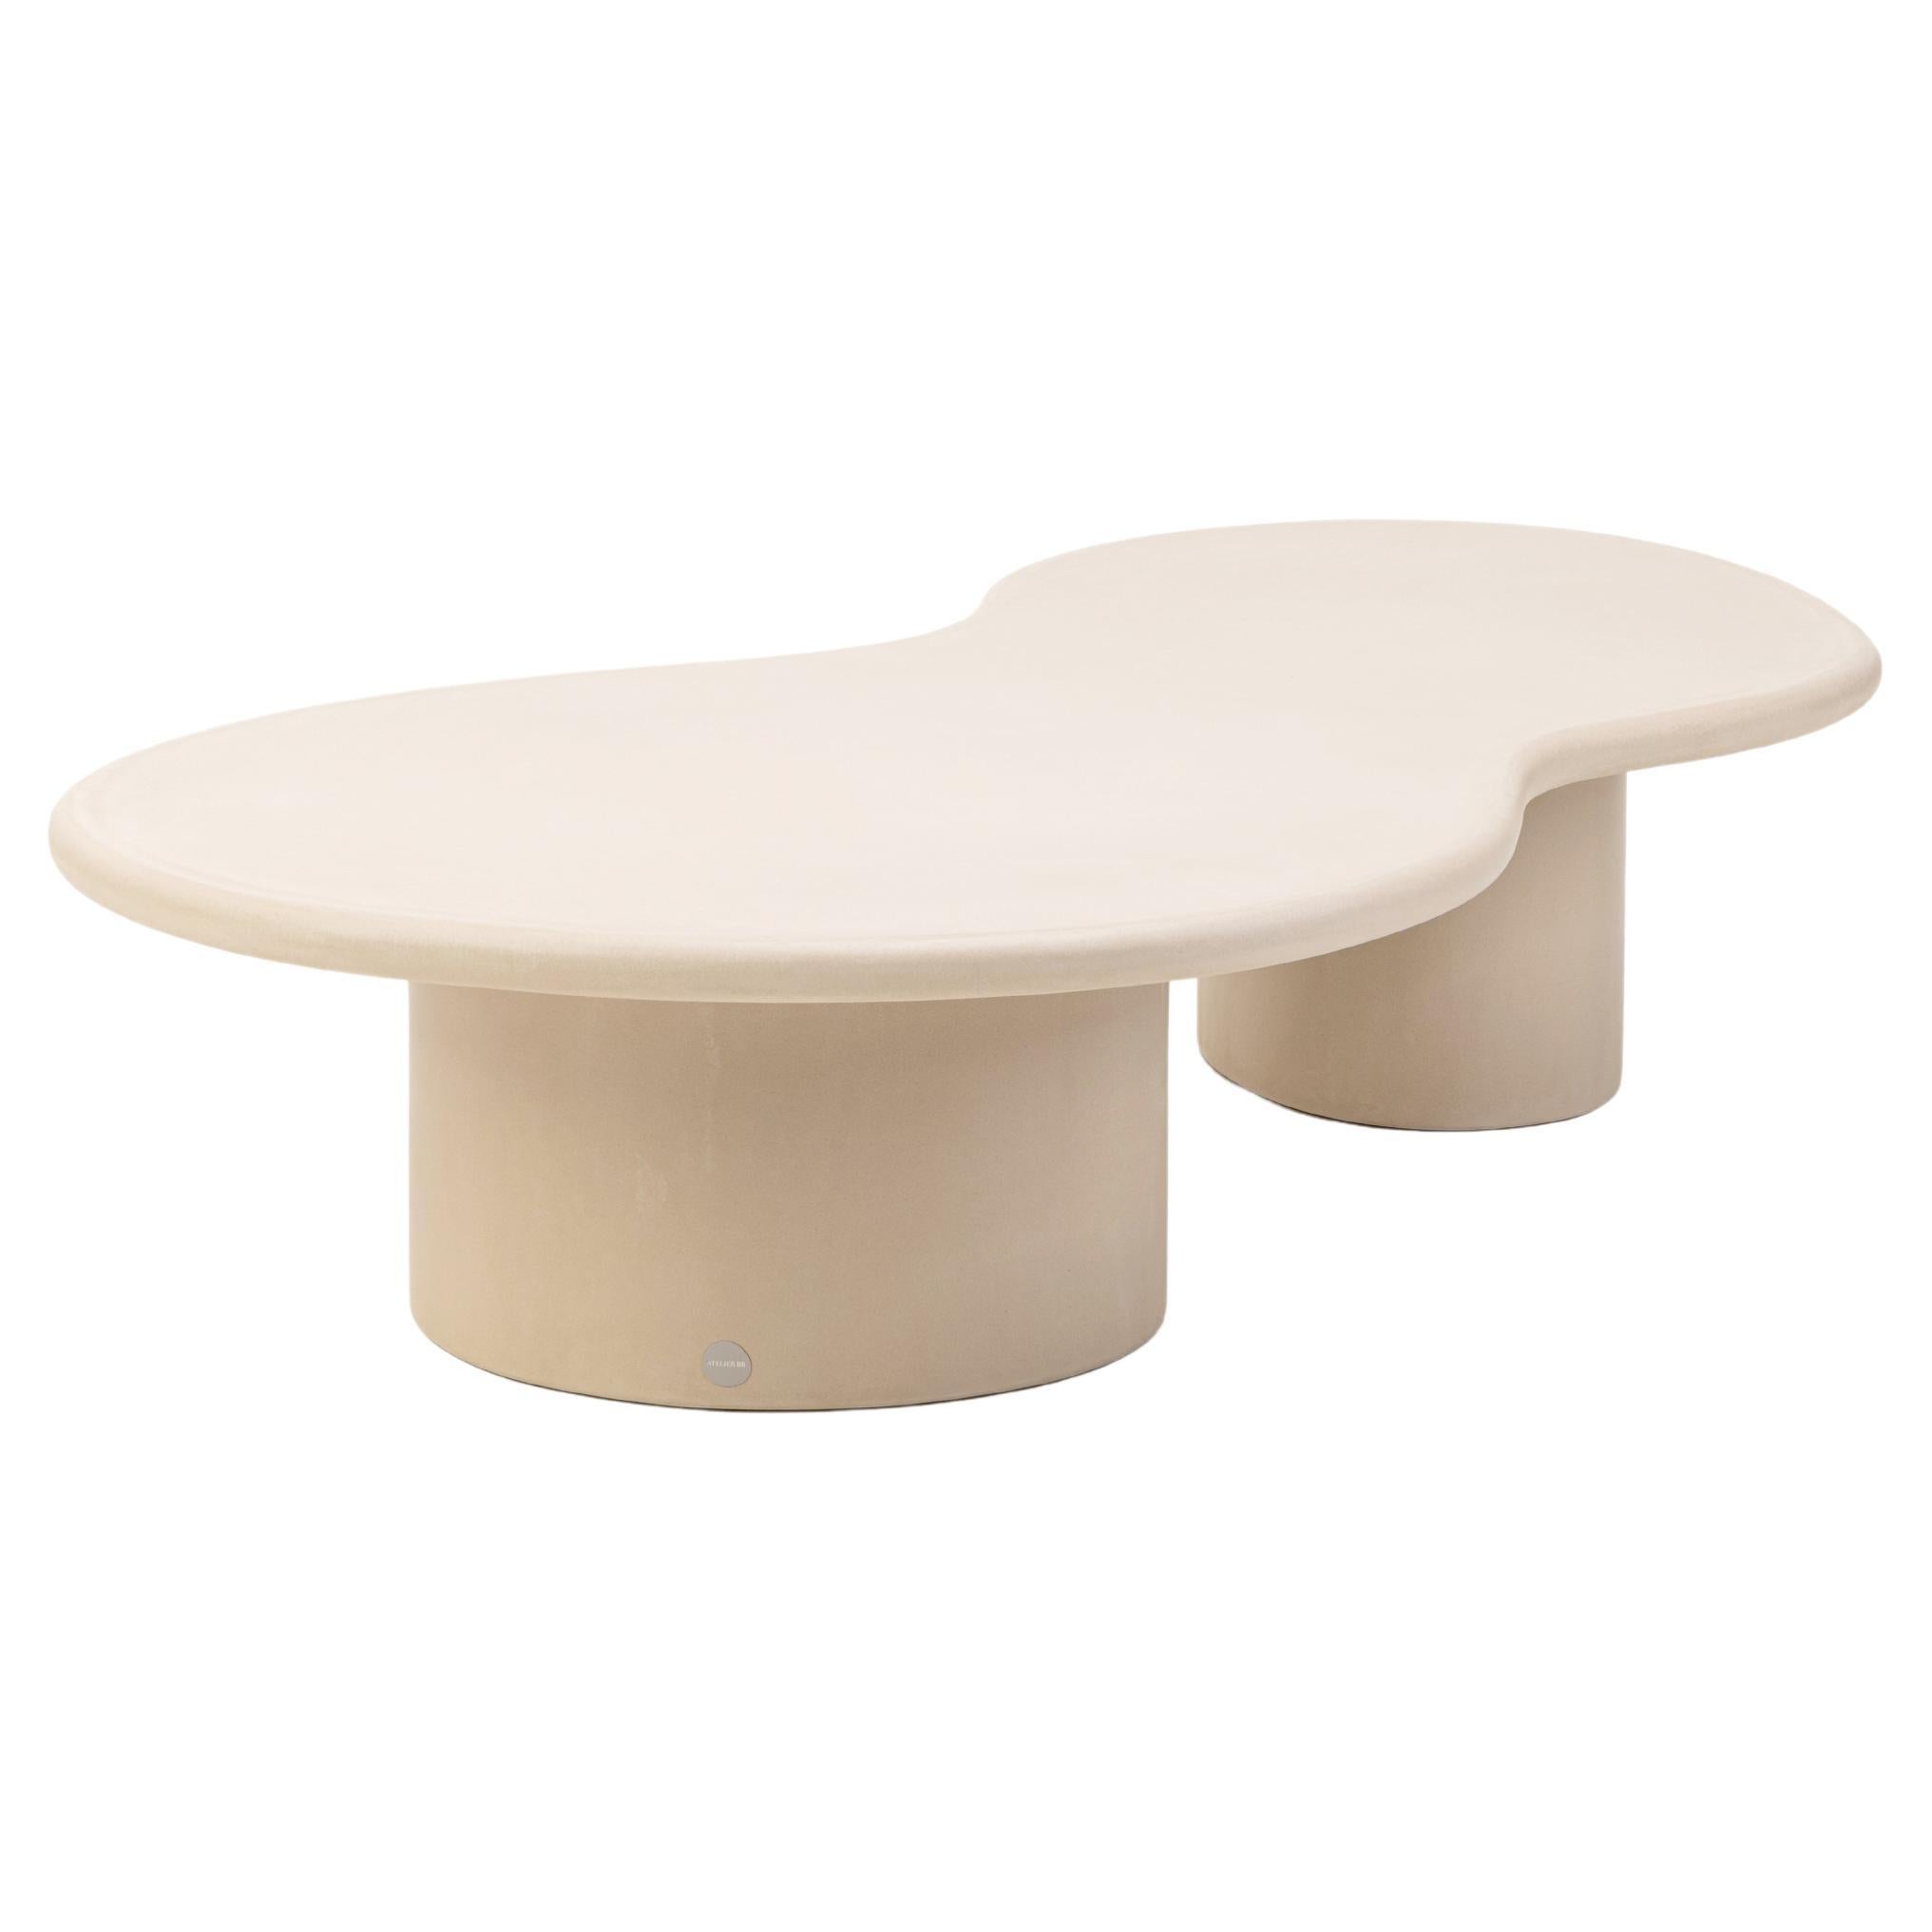 Organic Shaped Natural Plaster Coffee Table "Ovum" 170 by Isabelle Beaumont